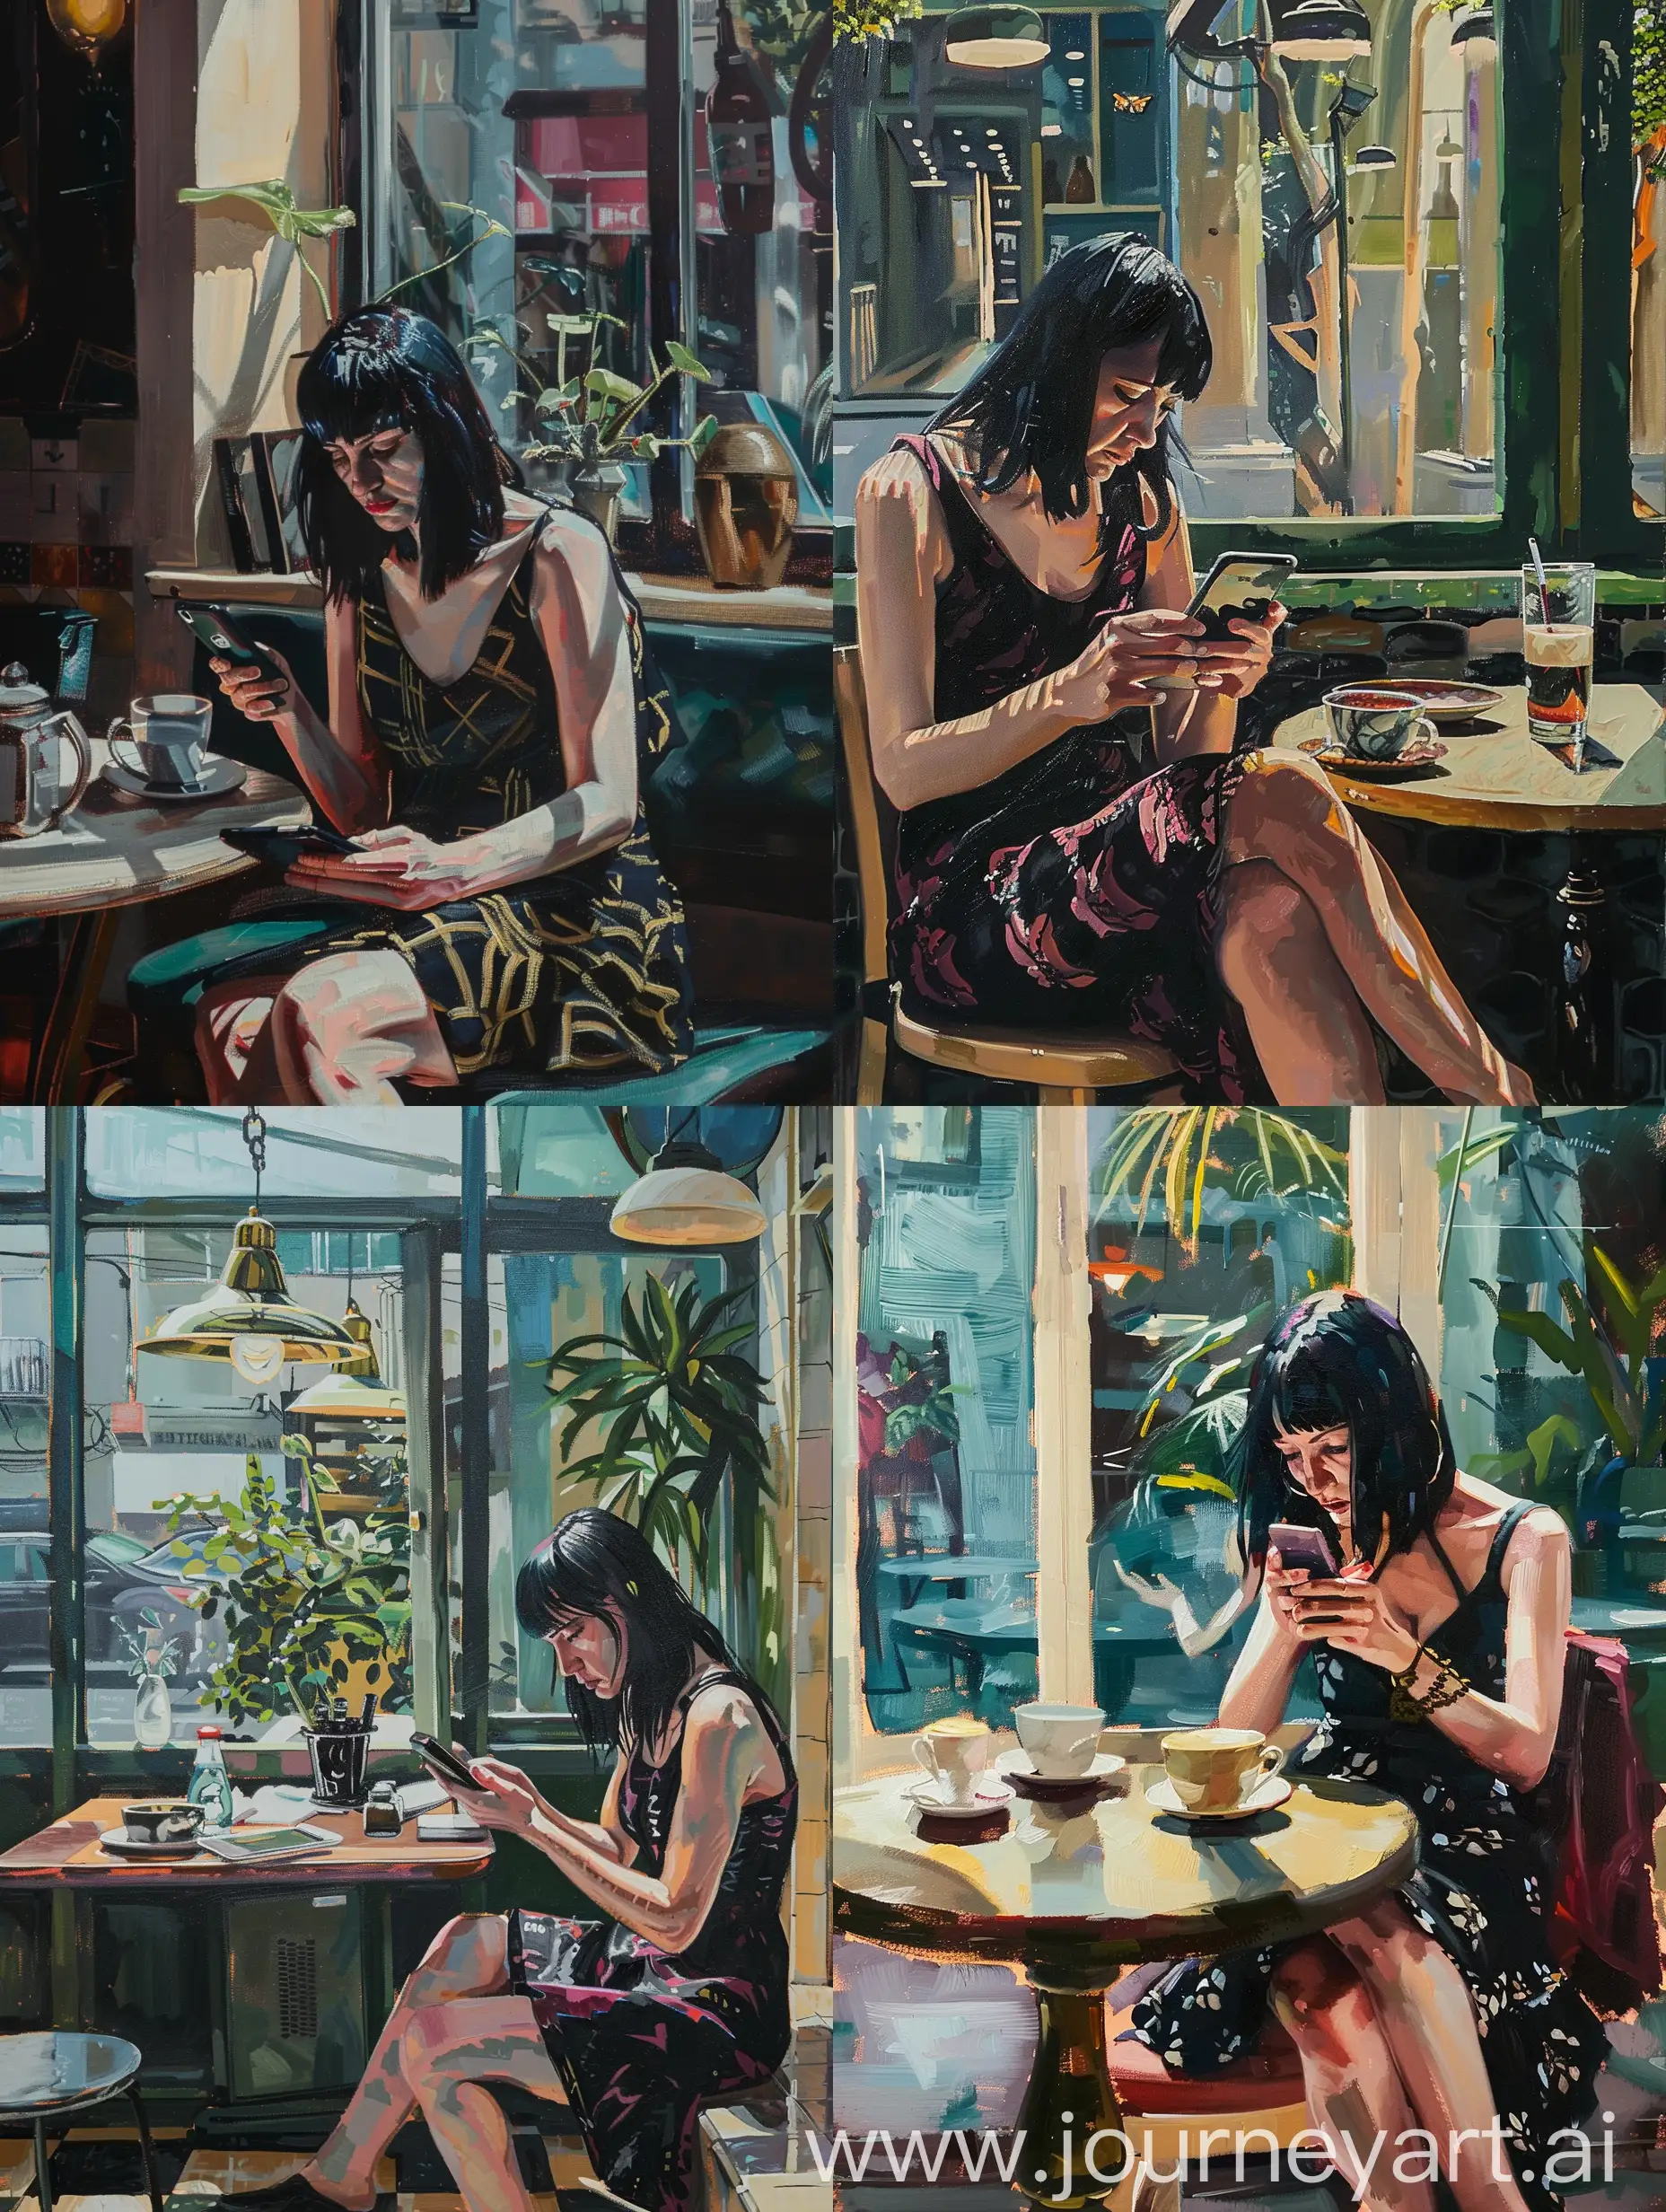 The genre oil painting features a realistic style with a focus on capturing everyday life moments. It depicts a man in a contemporary setting, engrossed in her smartphone while seated cafe, surrounded by domestic elements and a view of greenery outside.